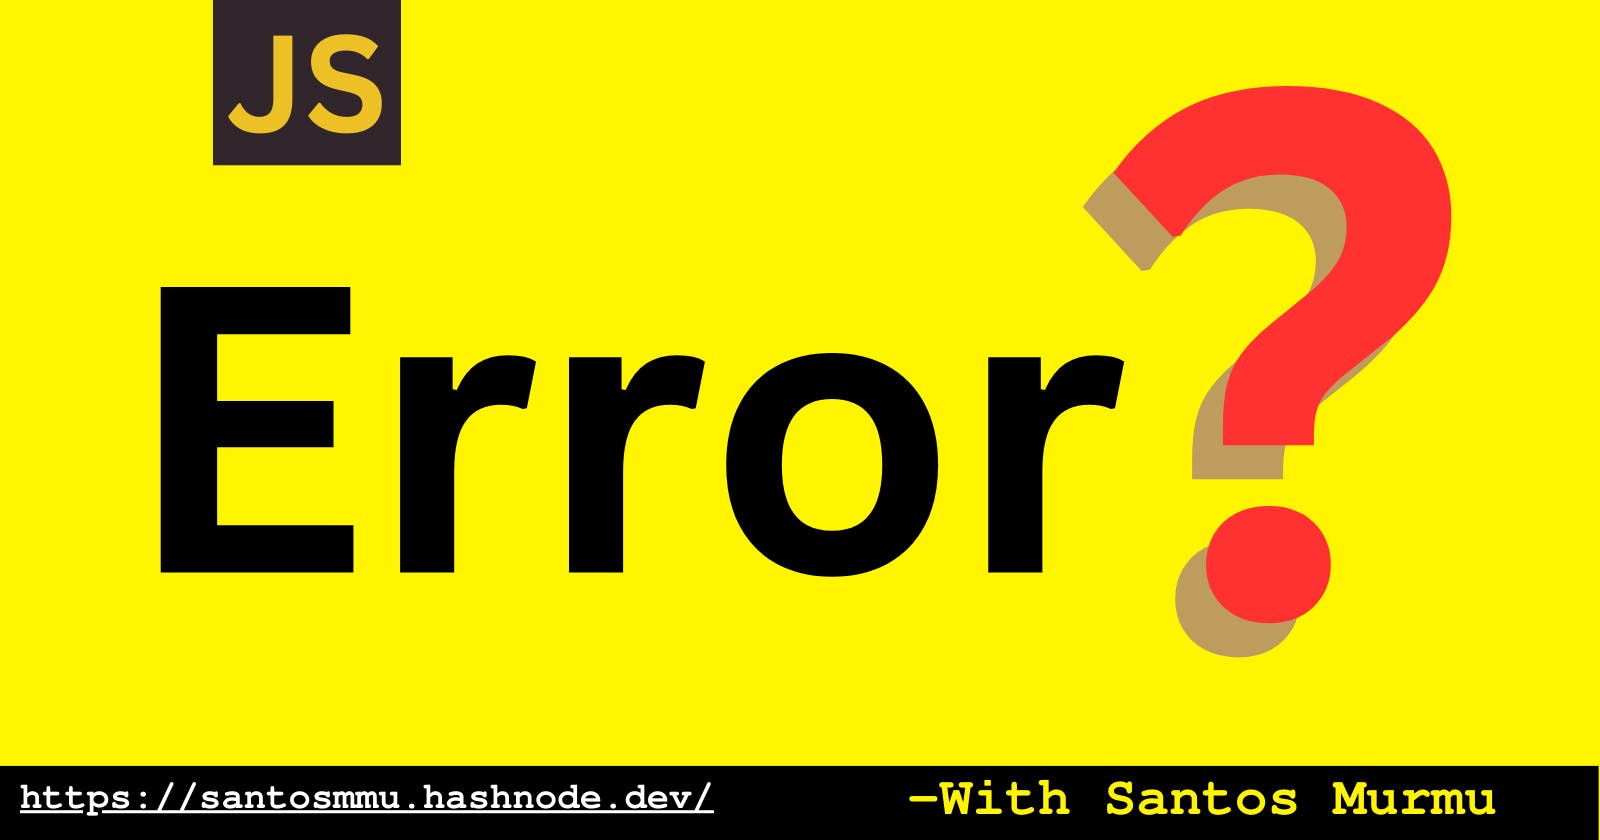 Errors in JavaScript, dedicated to ReferrenceError and Syntax Error.